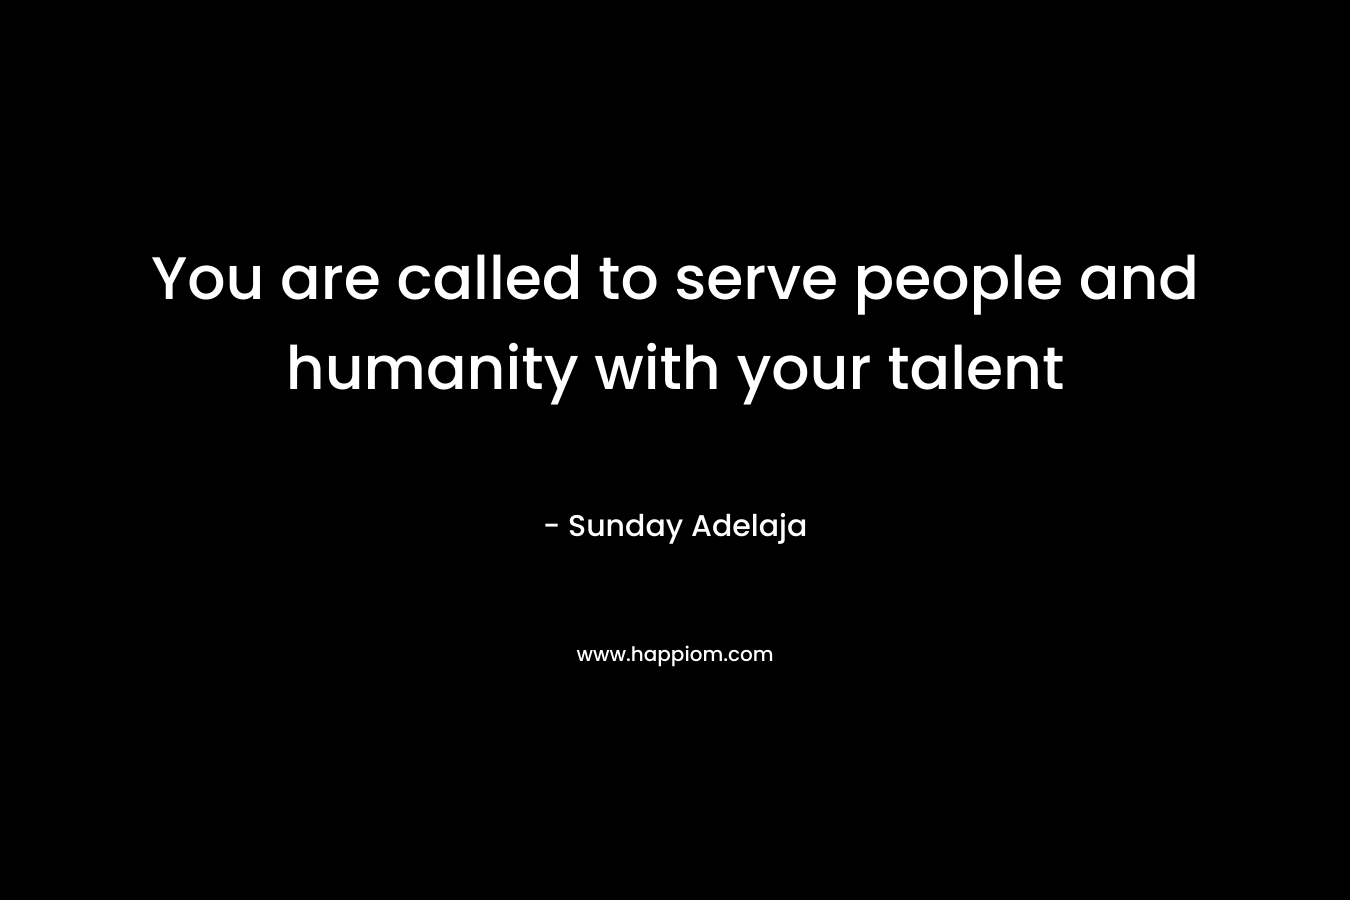 You are called to serve people and humanity with your talent